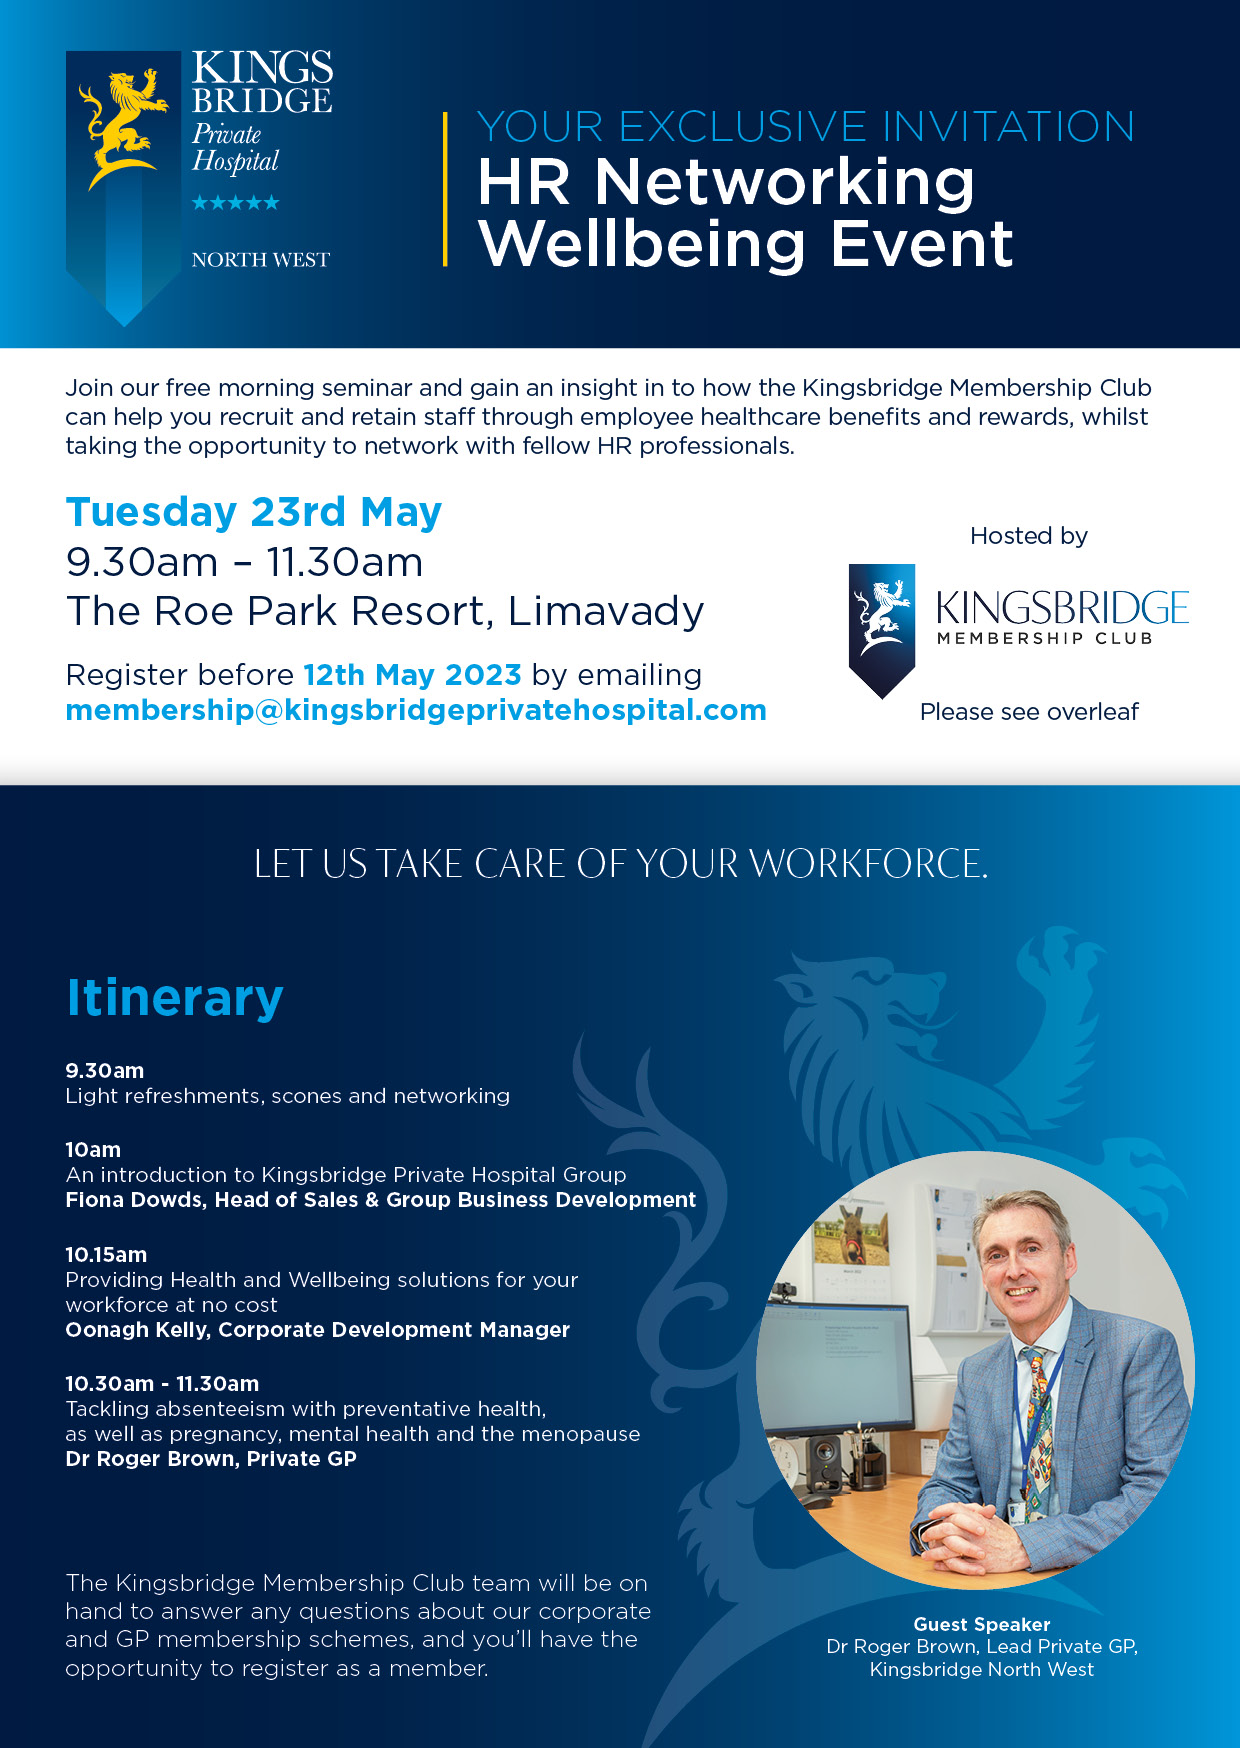 Kingsbridge Private Hospital North West HR Networking Wellbeing Event